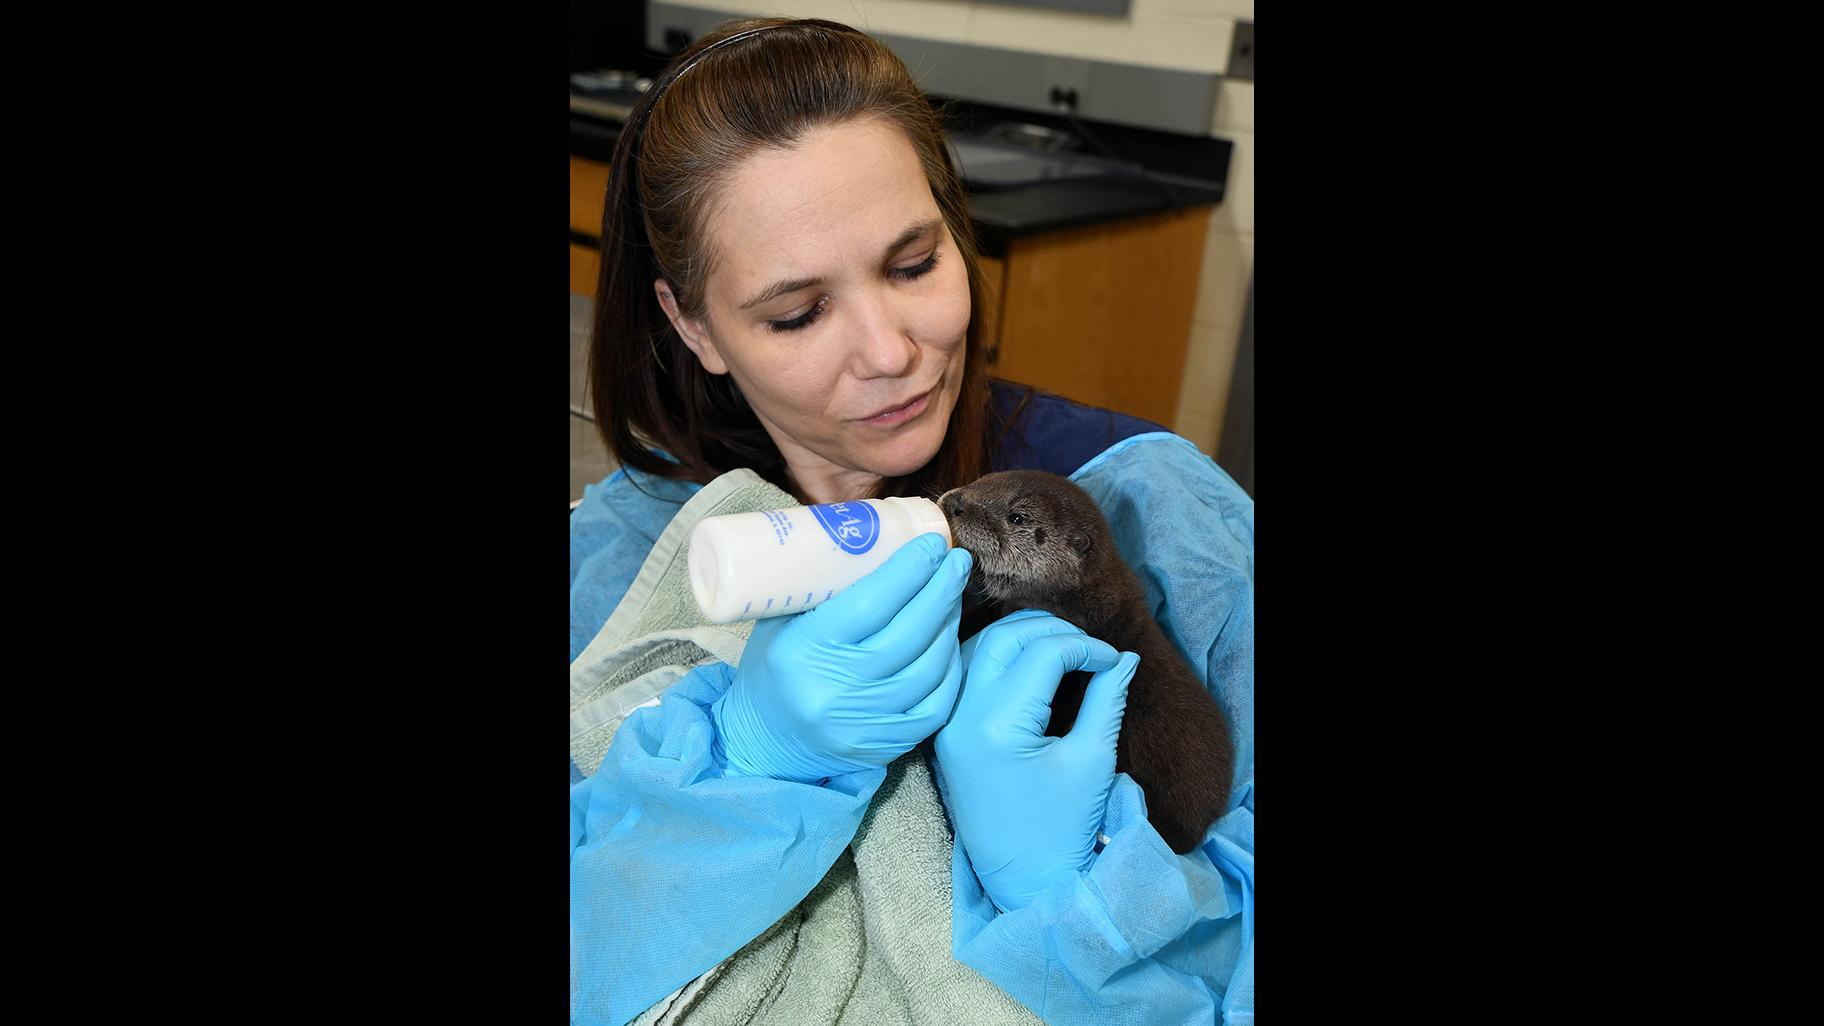 Michelle Soszynski, a senior animal care specialist at Brookfield Zoo’s Animal Hospital, cares for a North American river otter born at the zoo February 26. (Jim Schulz / Chicago Zoological Society)